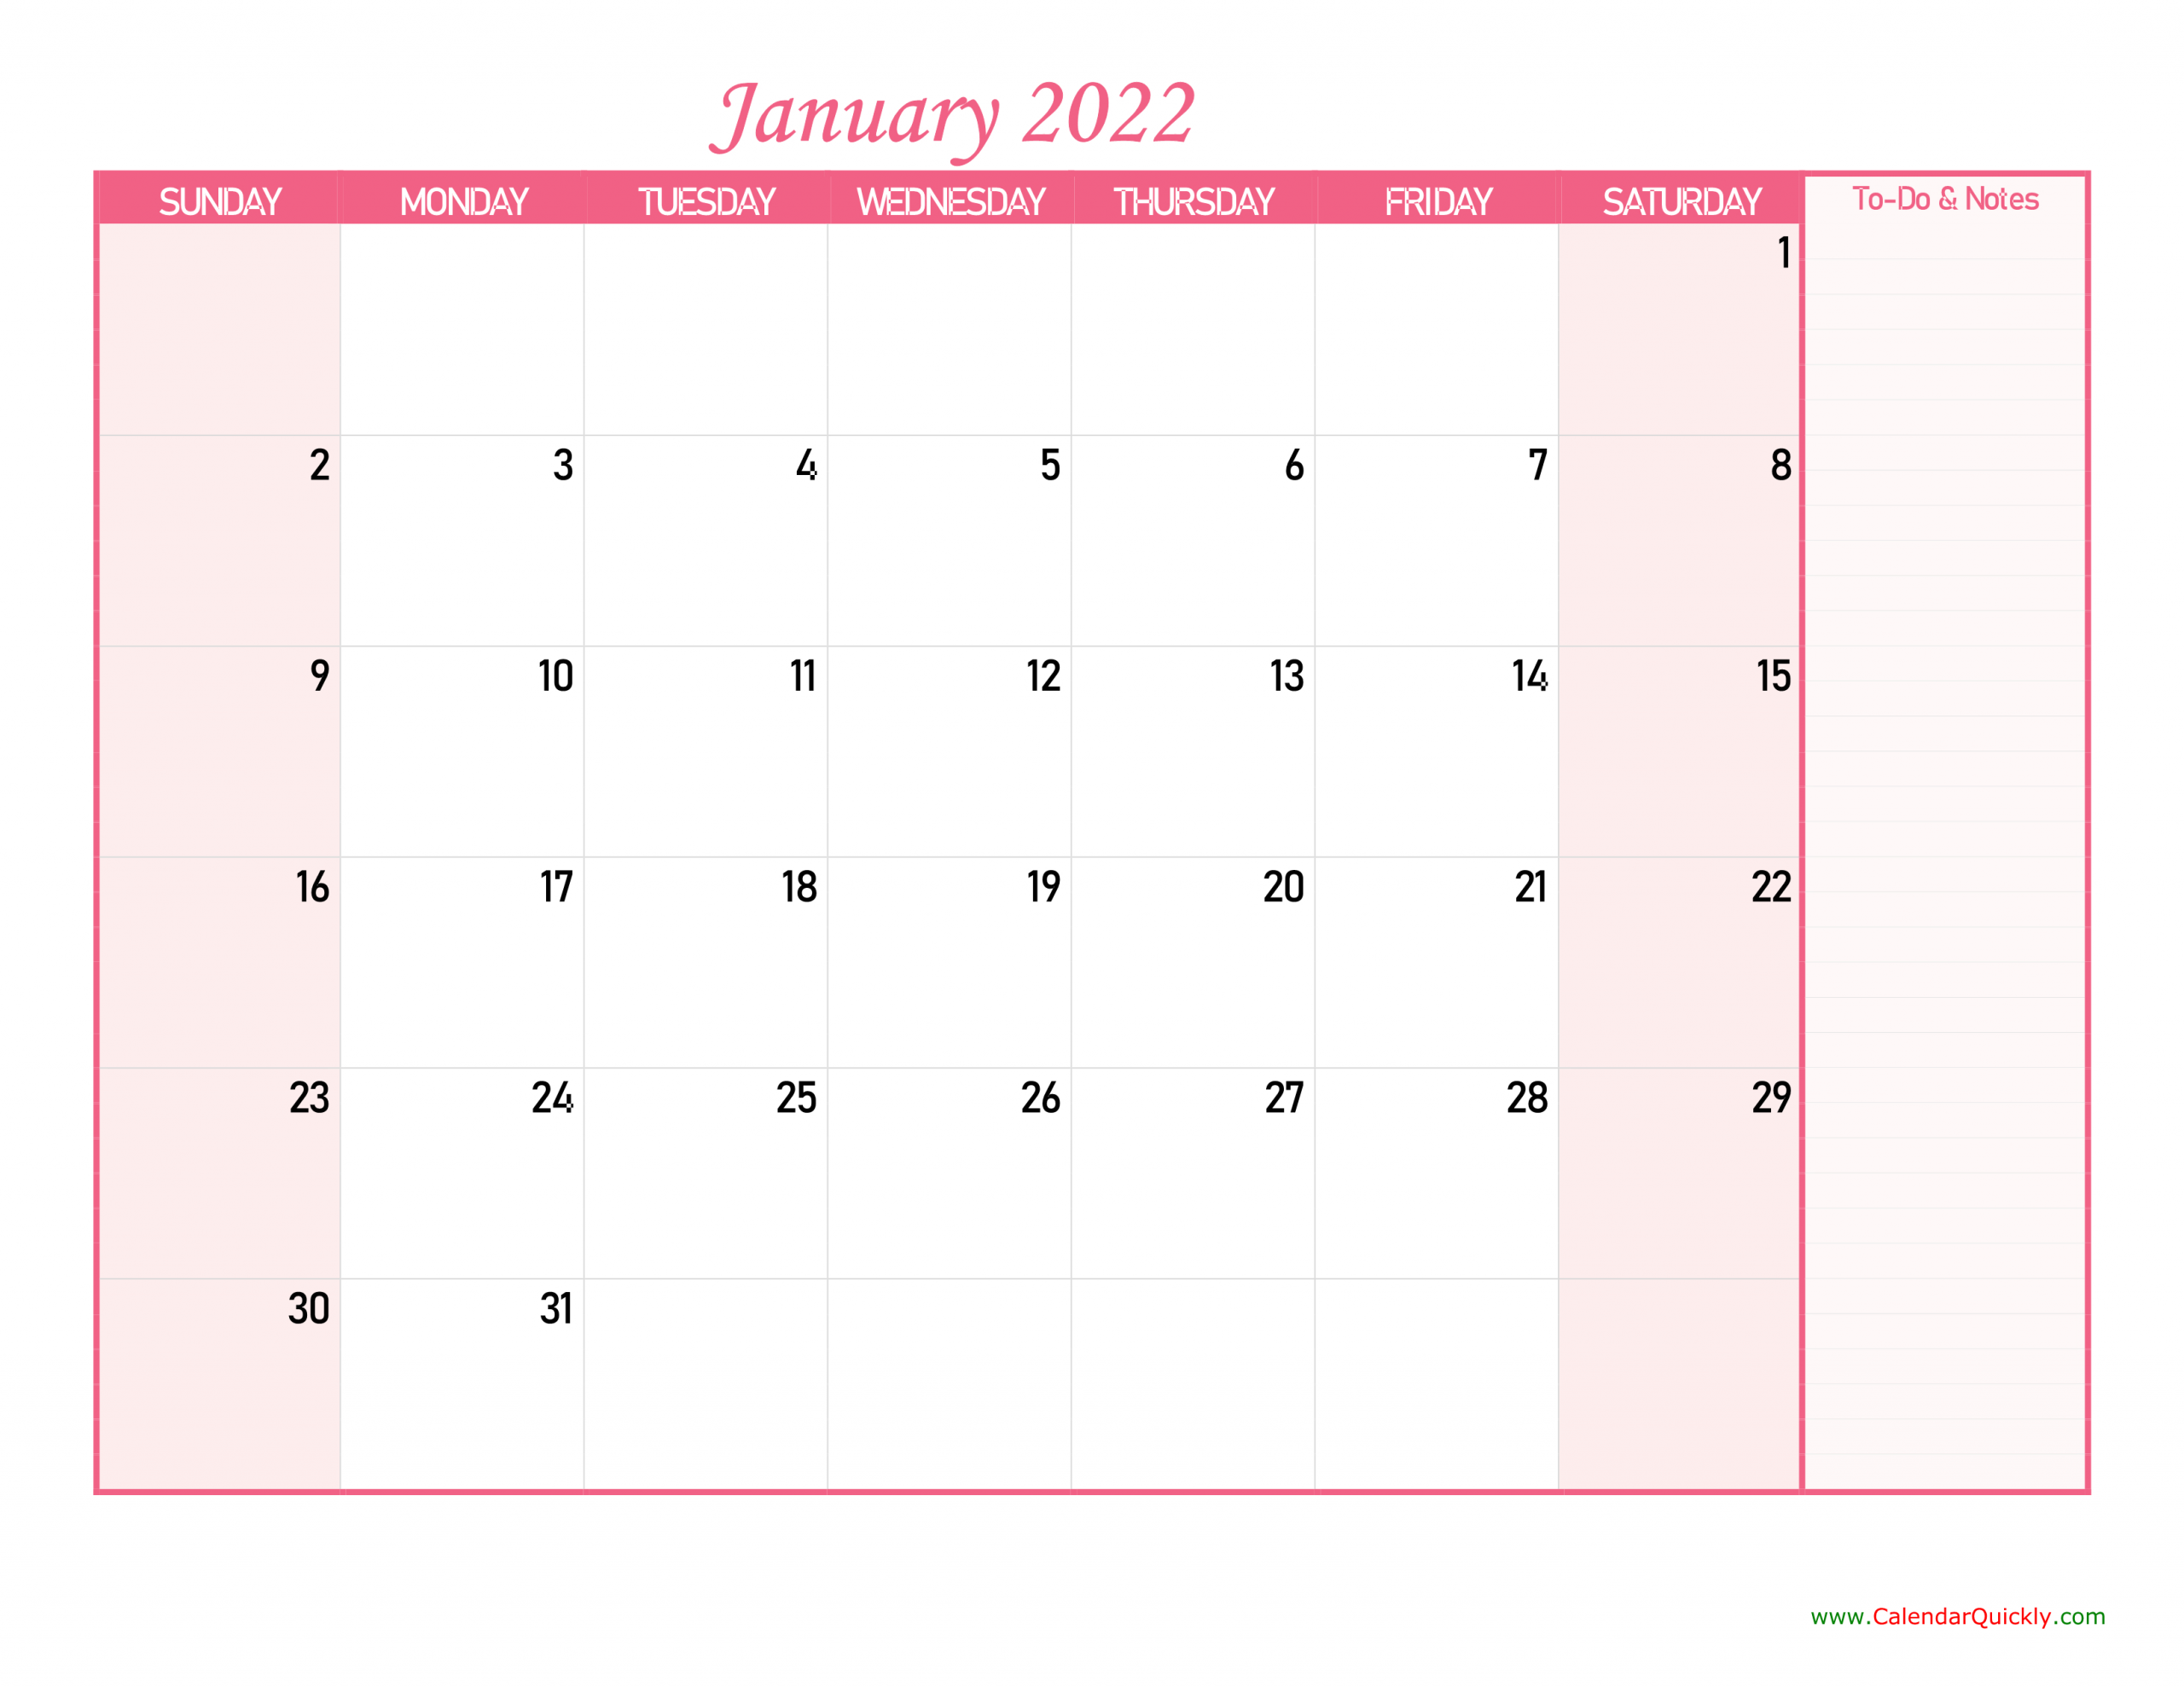 Monthly Calendar 2022 With Notes | Calendar Quickly